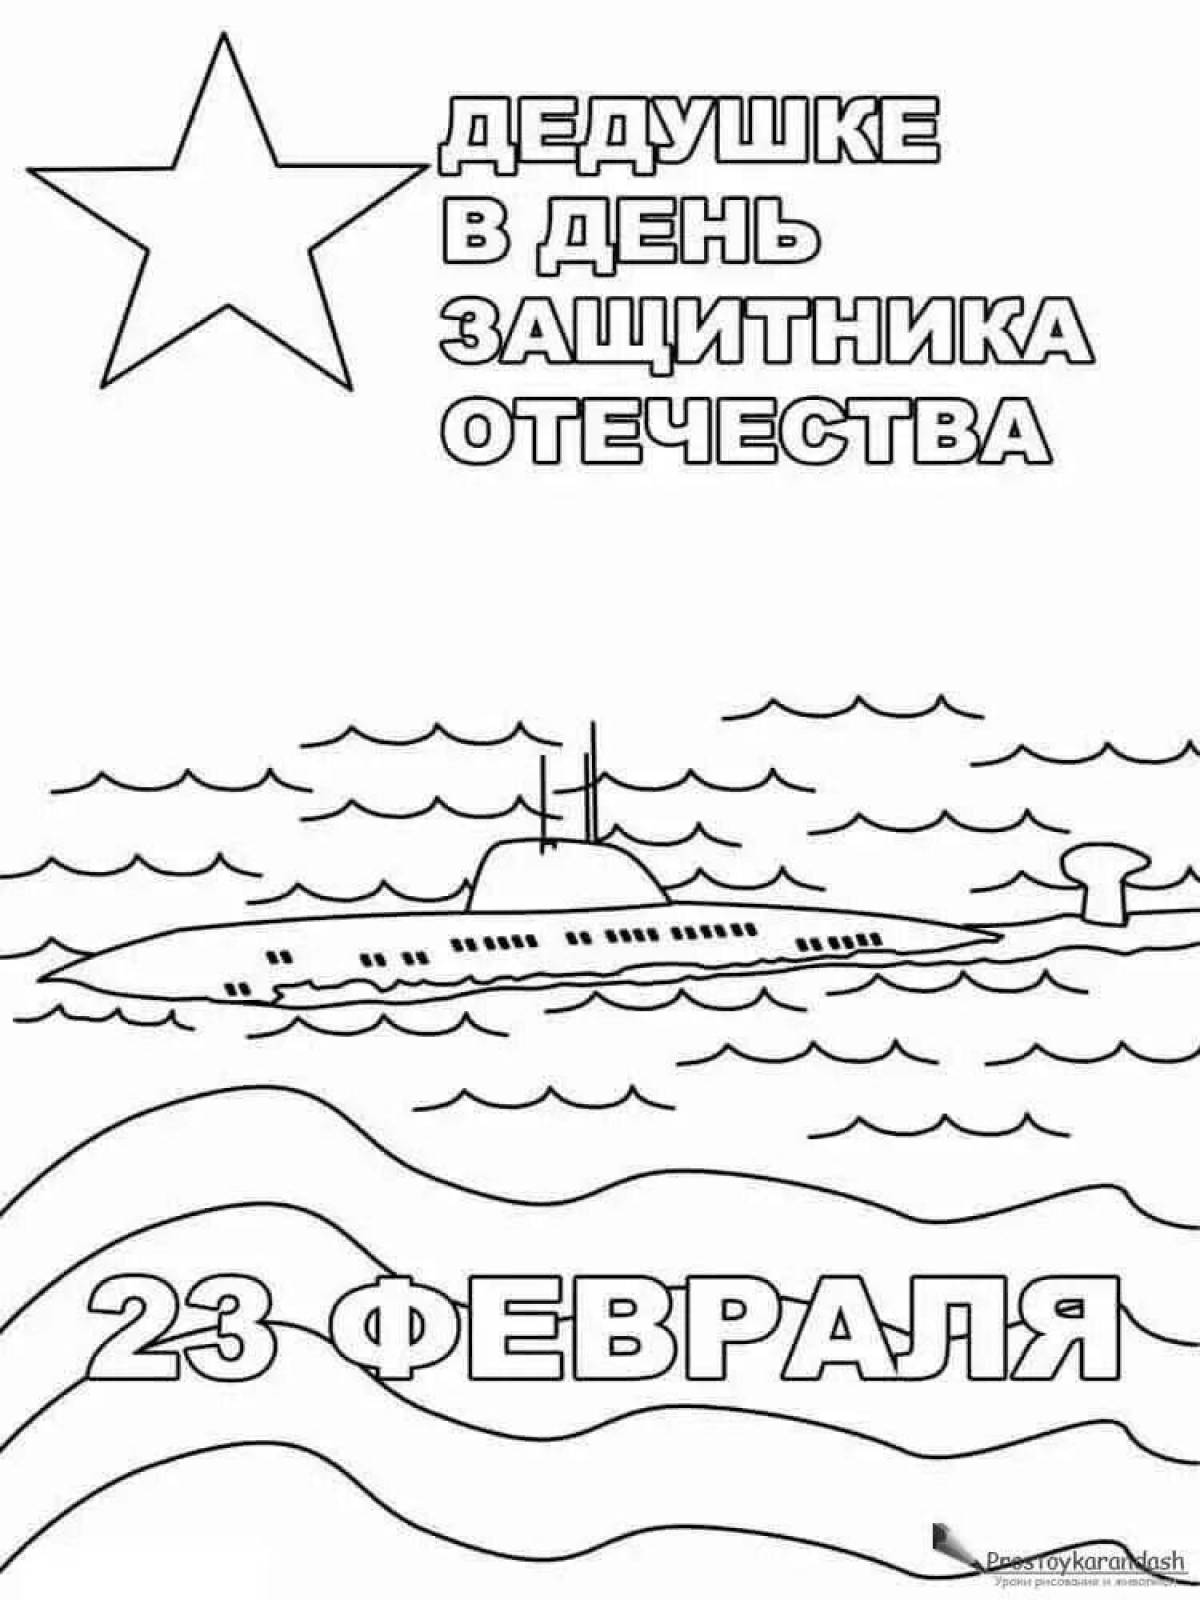 Celebration card for Defender of the Fatherland Day